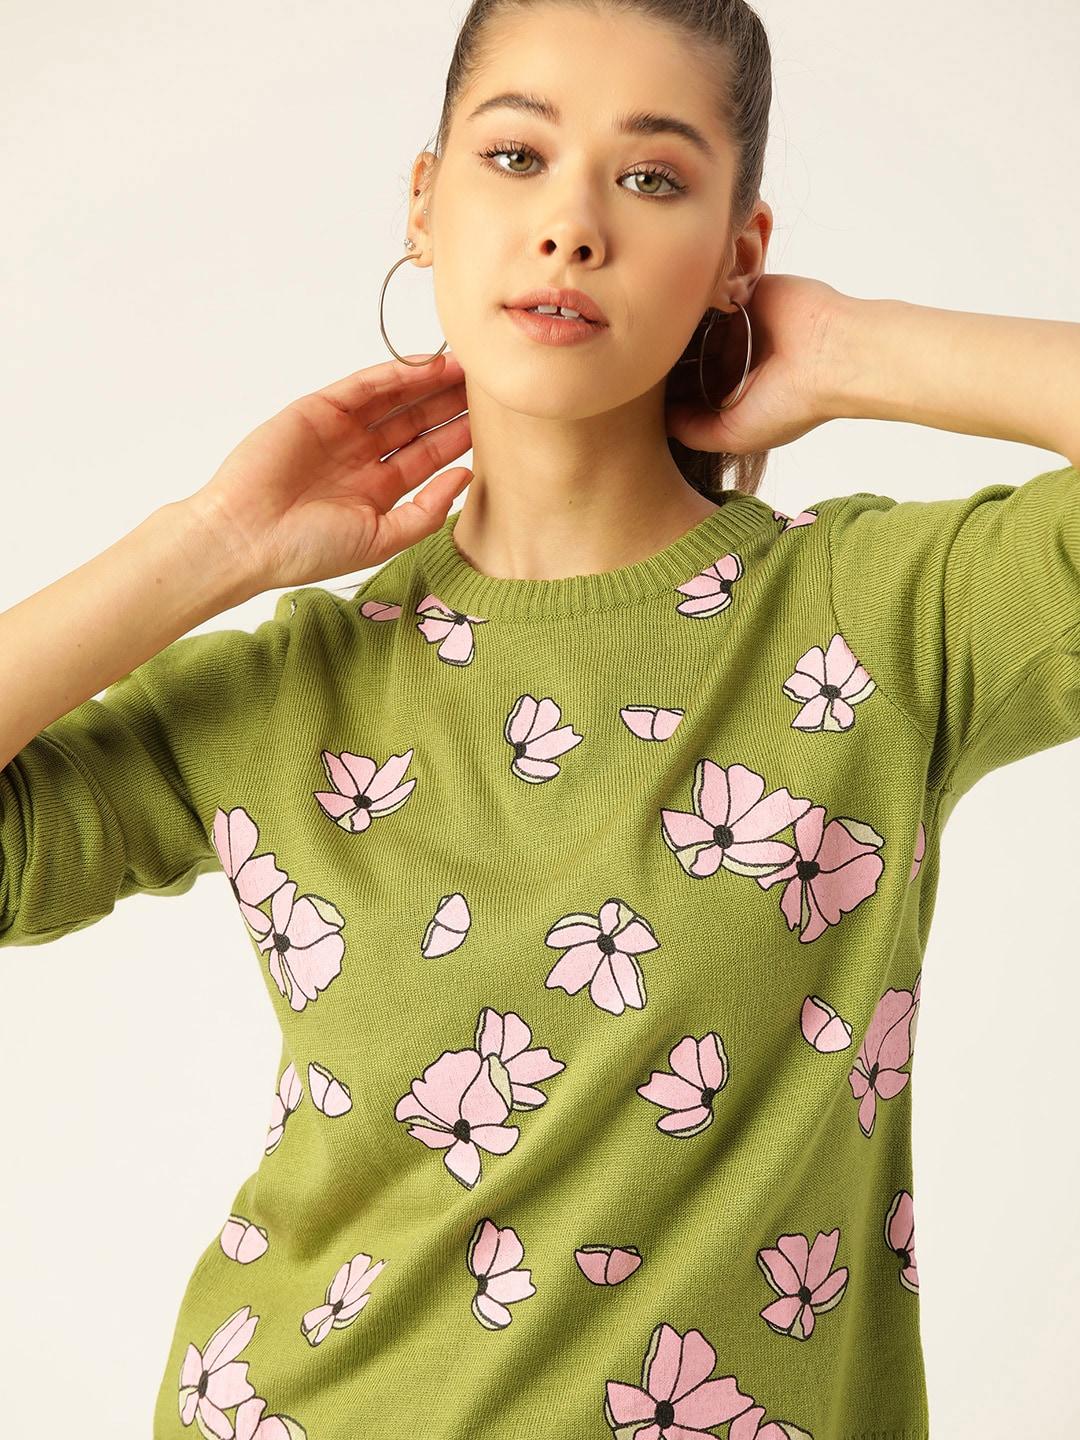 dressberry-women-green-&-pink-floral-print-acrylic-pullover-sweater